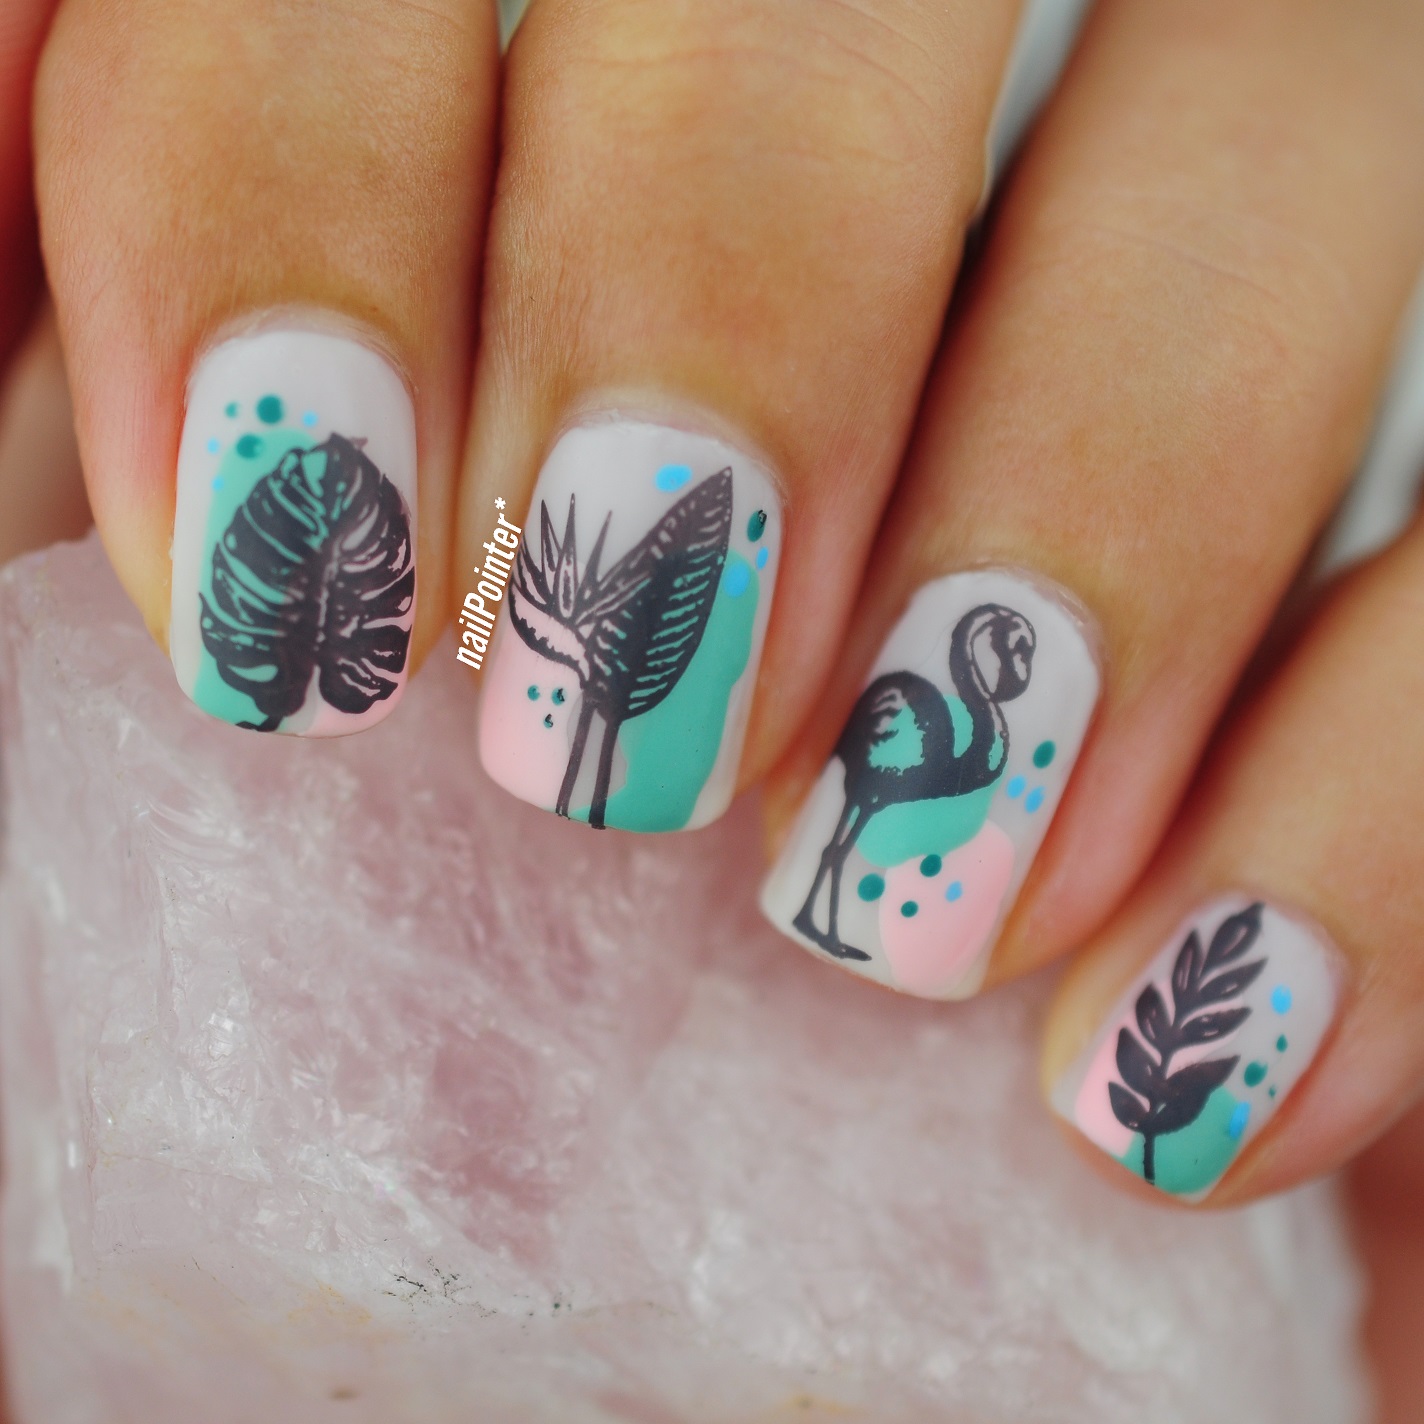 Pastel Paradise Tropical Summer Nail Look using Essence, Twinkled T and MoYou London Paradise Plates